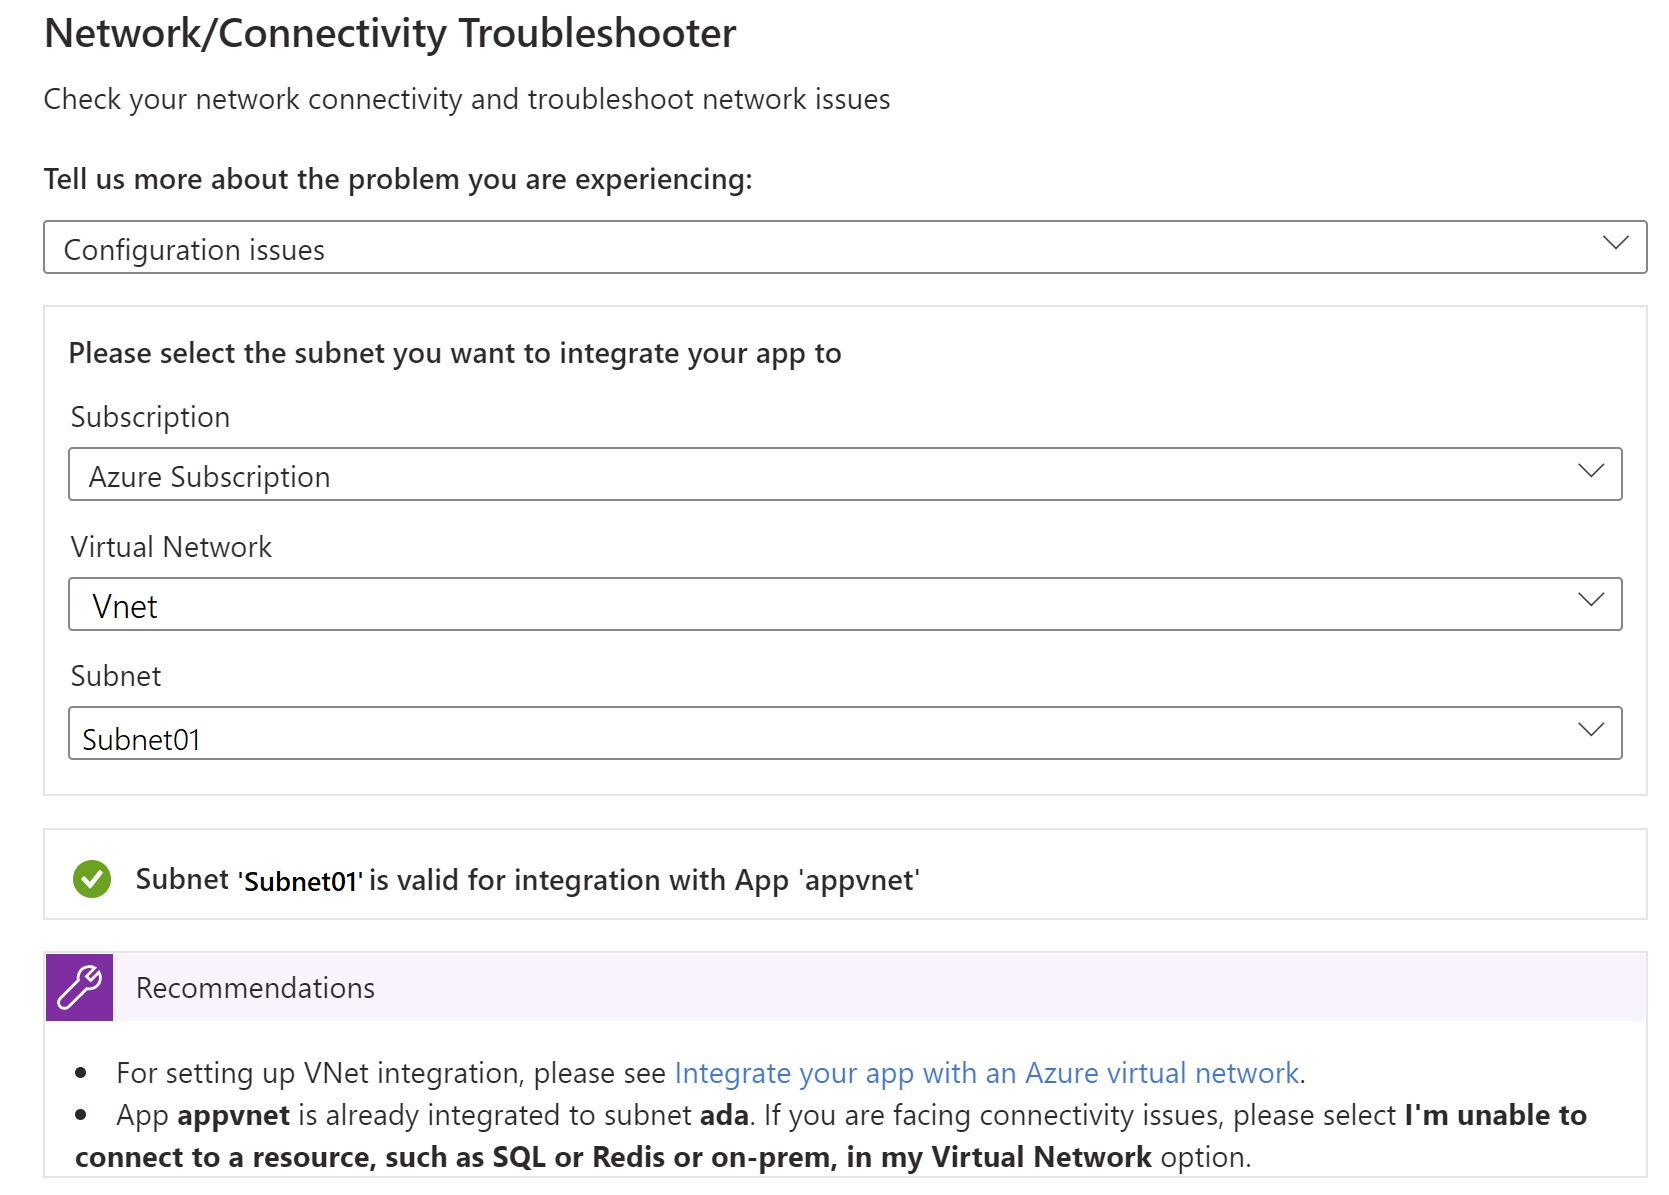 Screenshot that shows how to run  troubleshooter for configuration issues in the Azure portal.